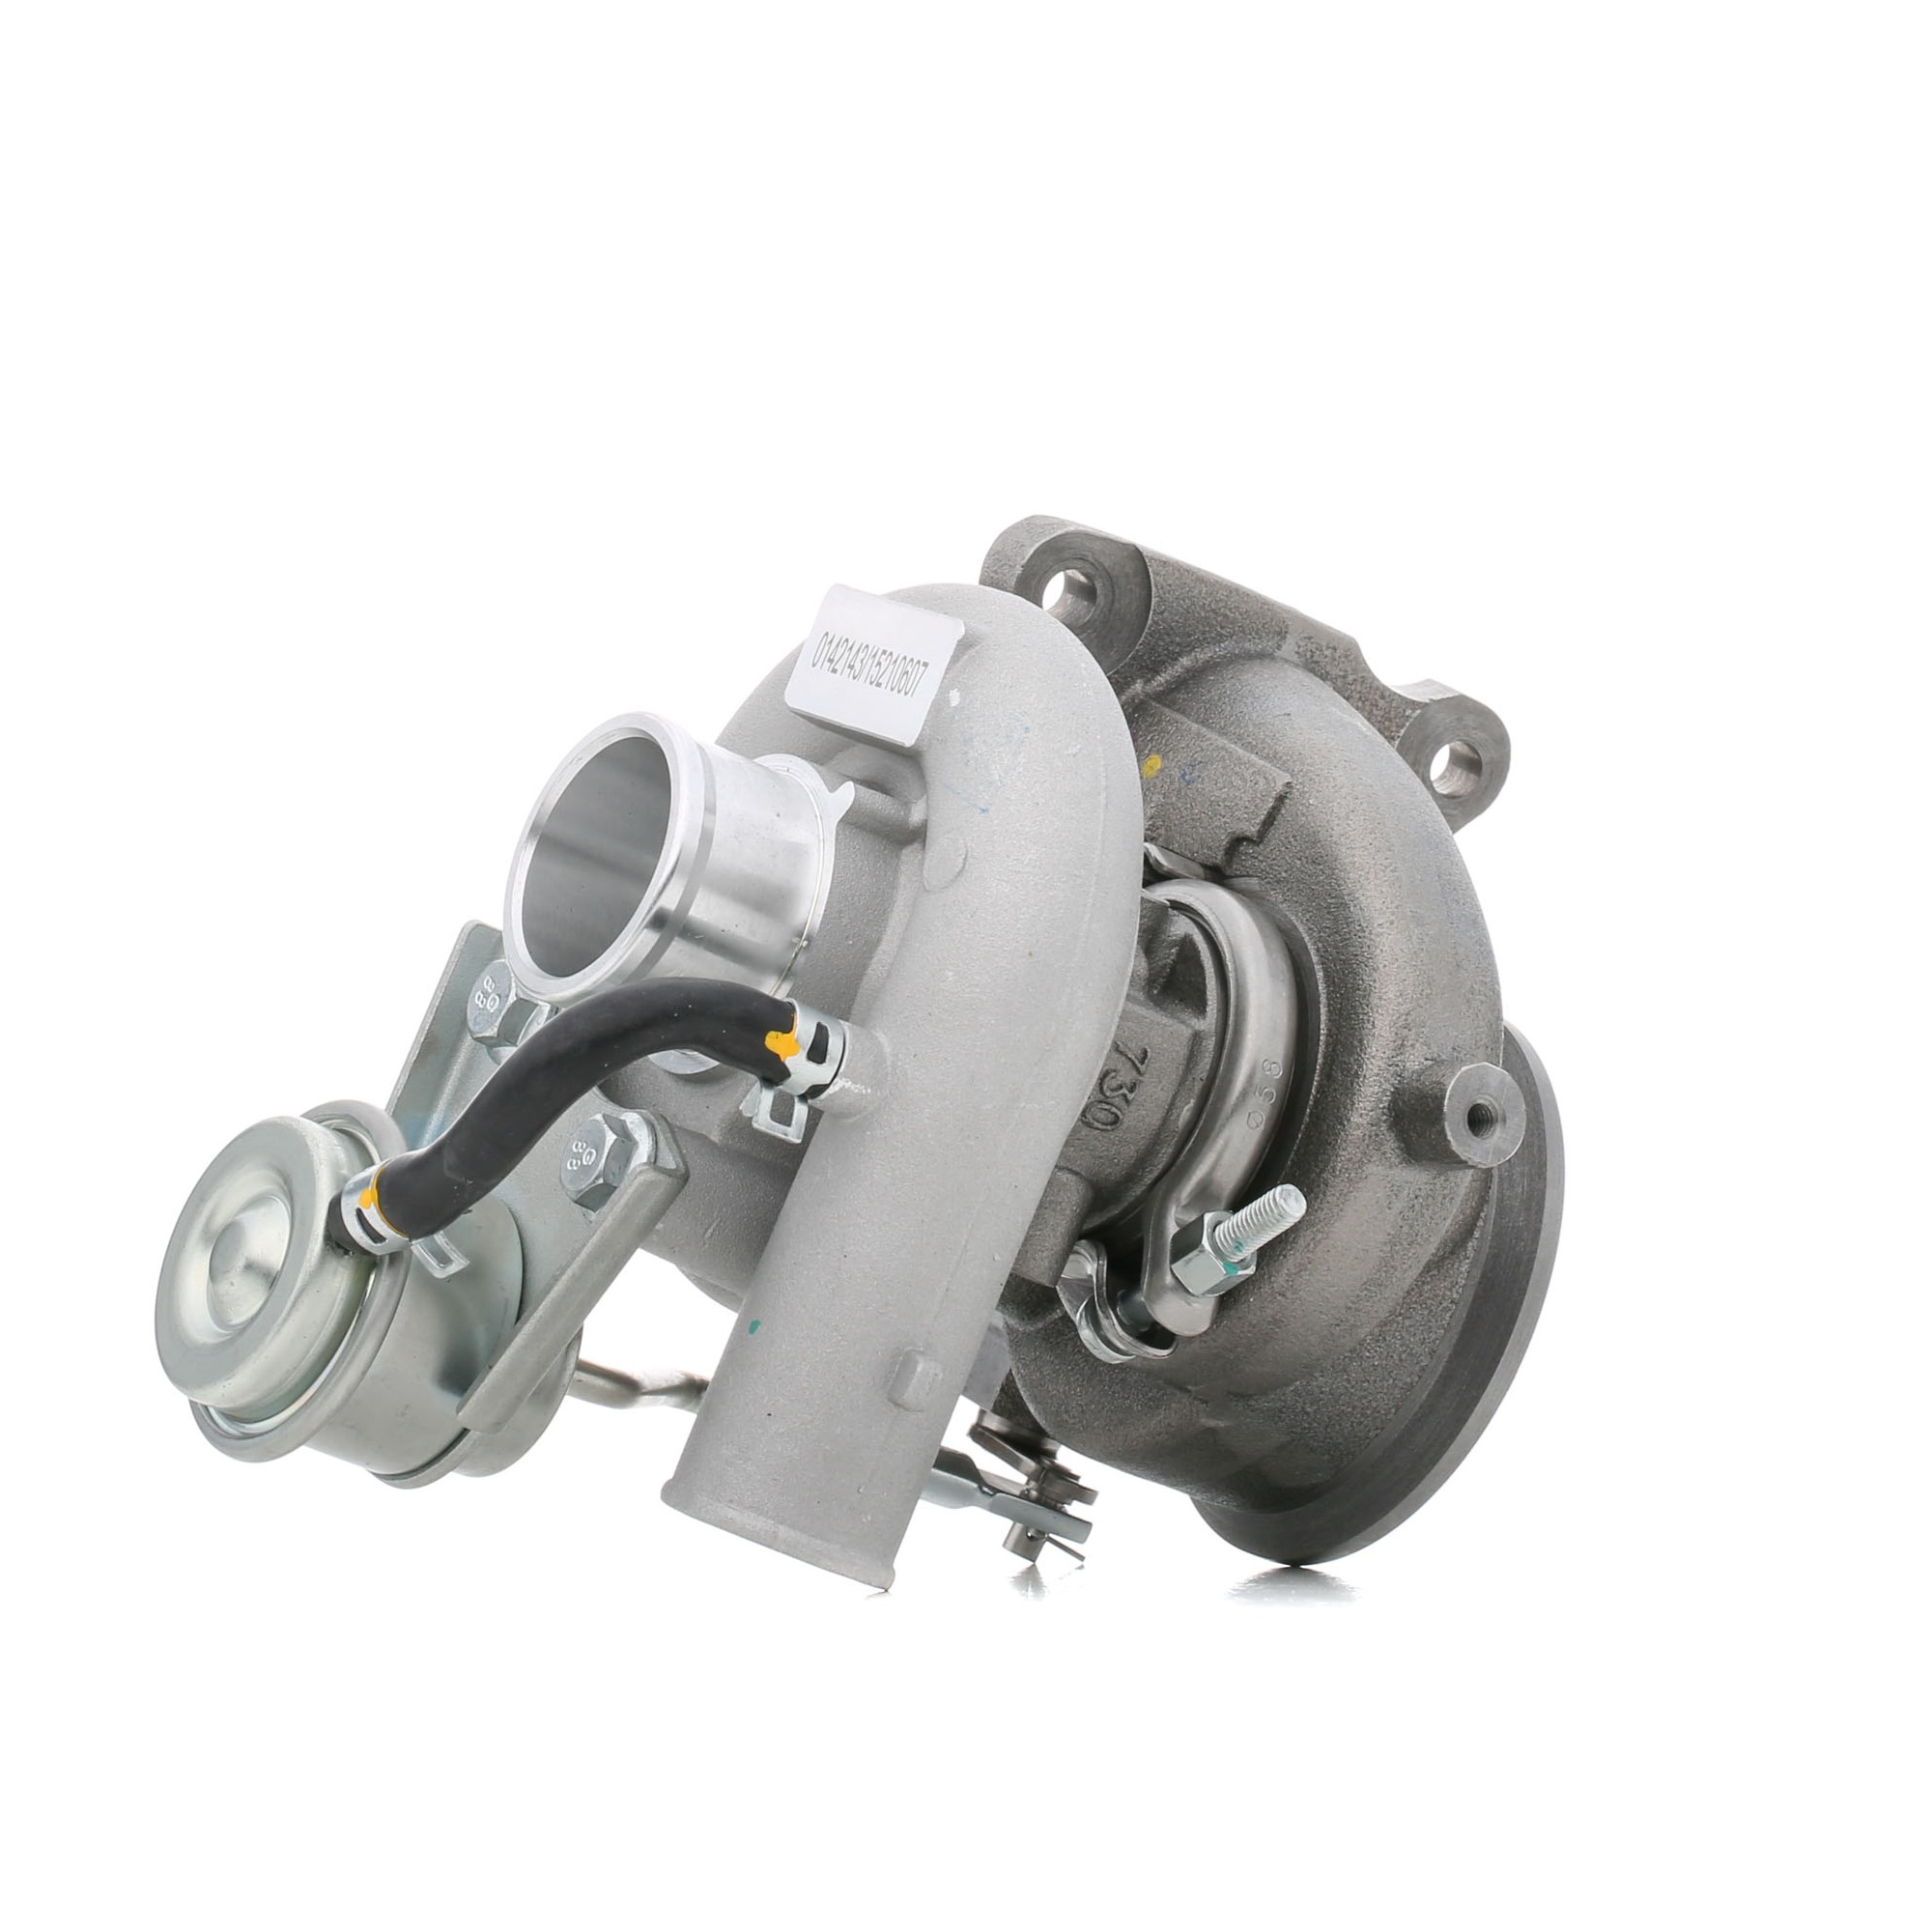 STARK SKCT-1190217 Turbocharger Exhaust Turbocharger, Air cooled, Vacuum-controlled, Incl. Gasket Set